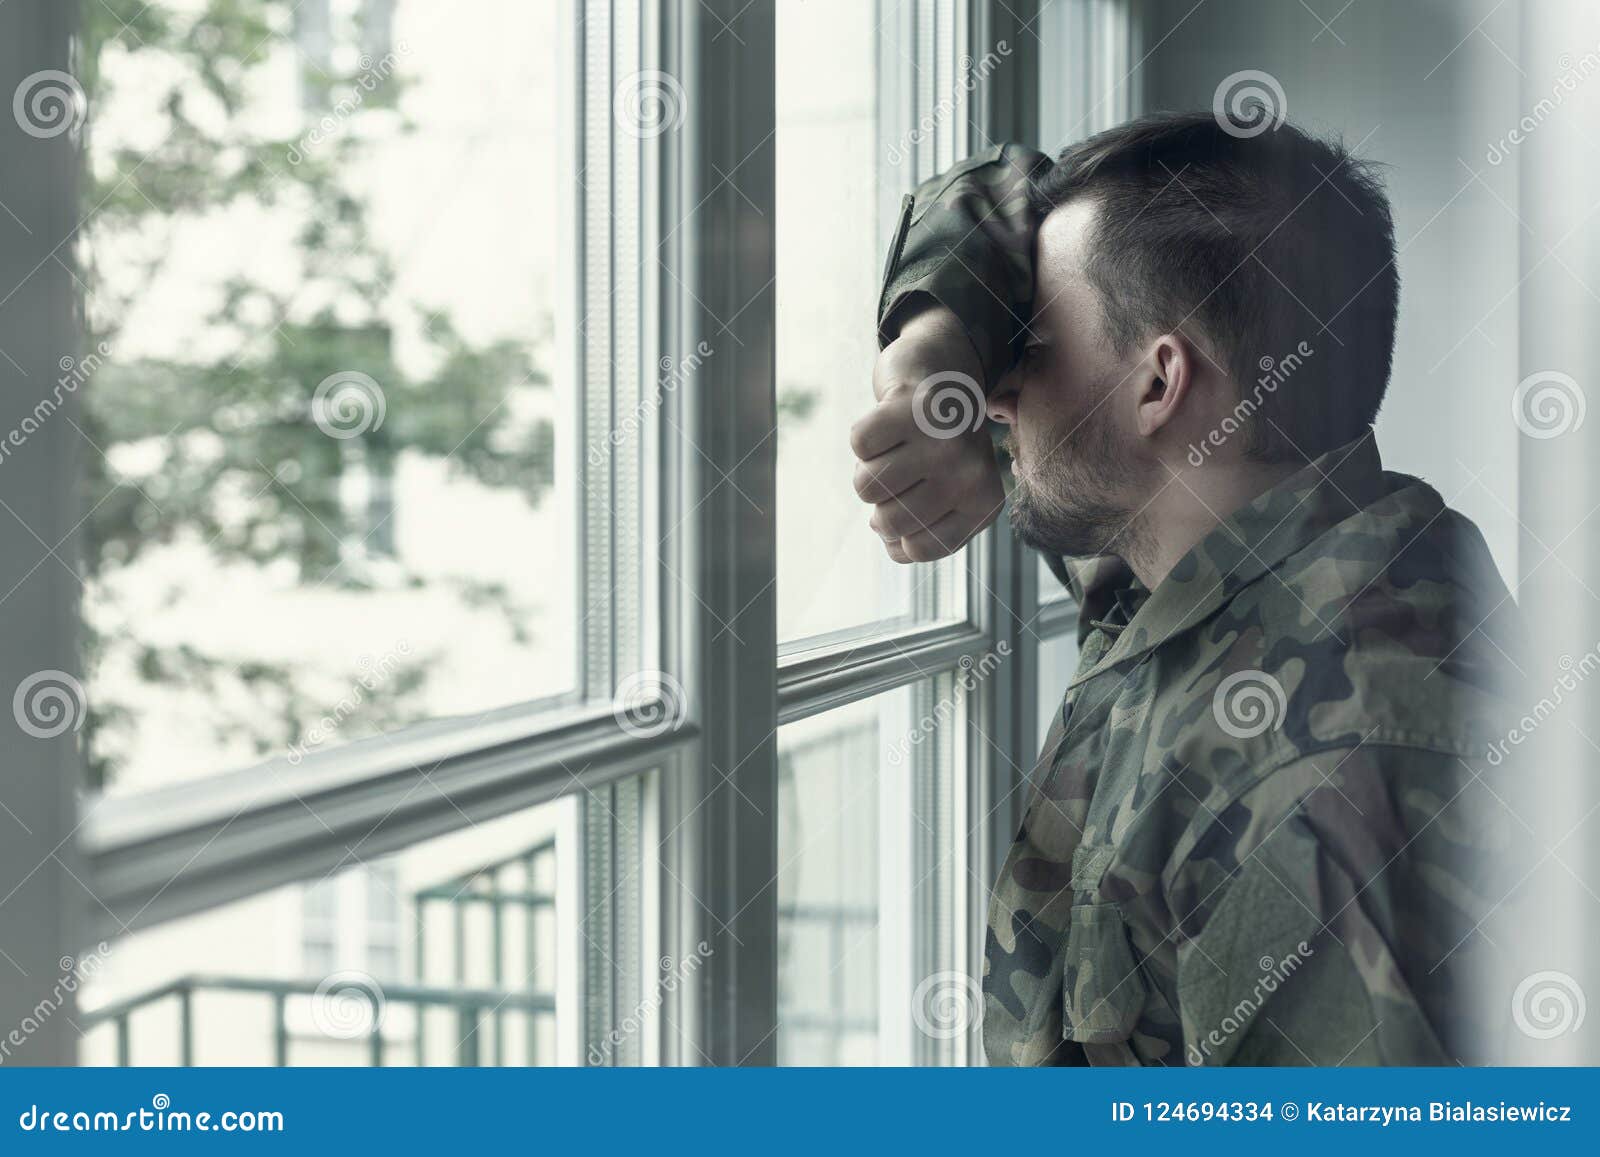 depressed and sad soldier in green uniform with trauma after war standing near the window